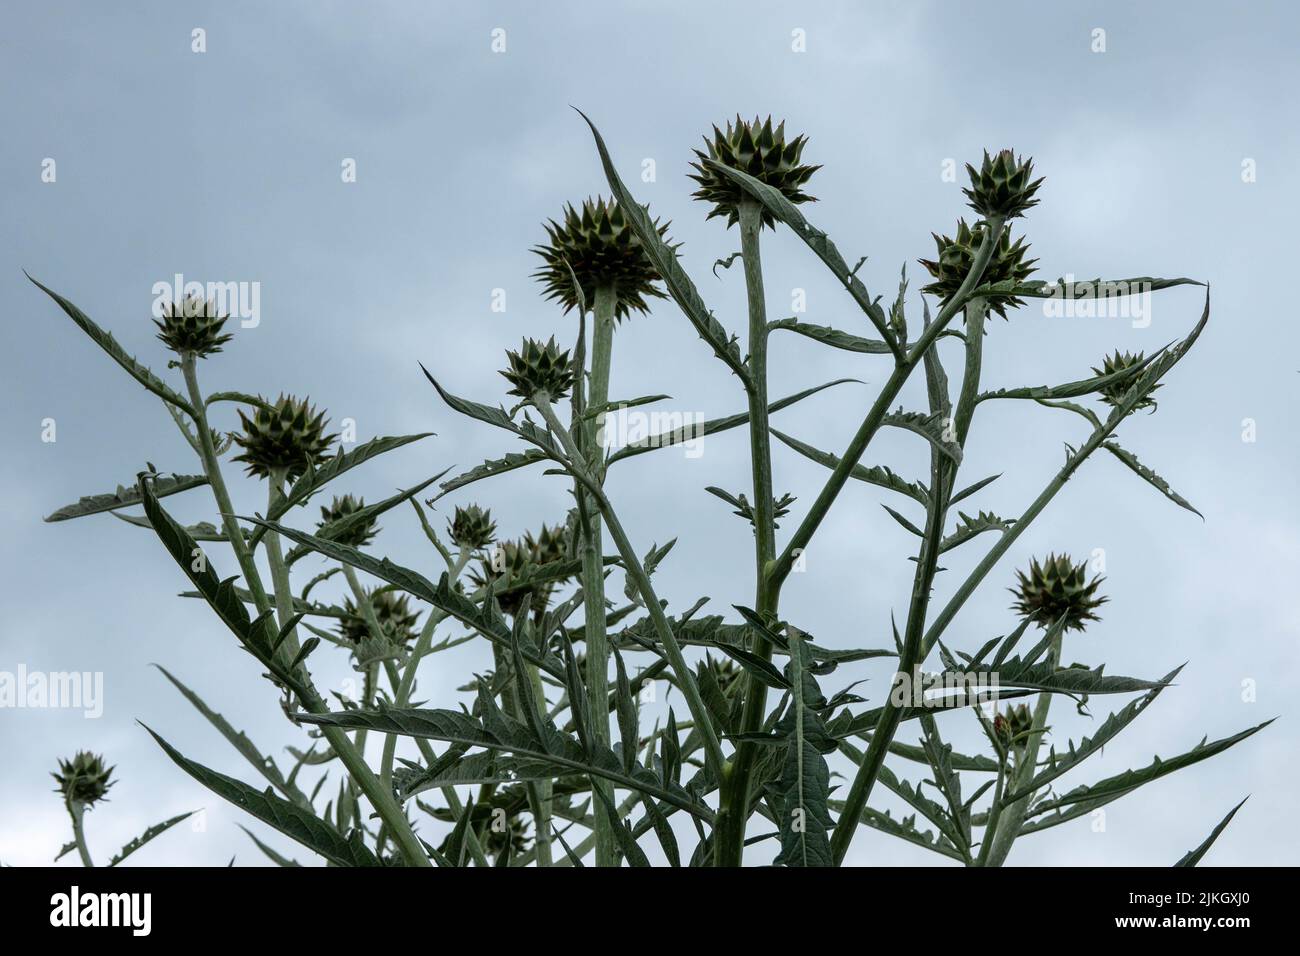 the globe artichoke also known by the names french artichoke and green artichoke with a stormy summer sky in the background Stock Photo